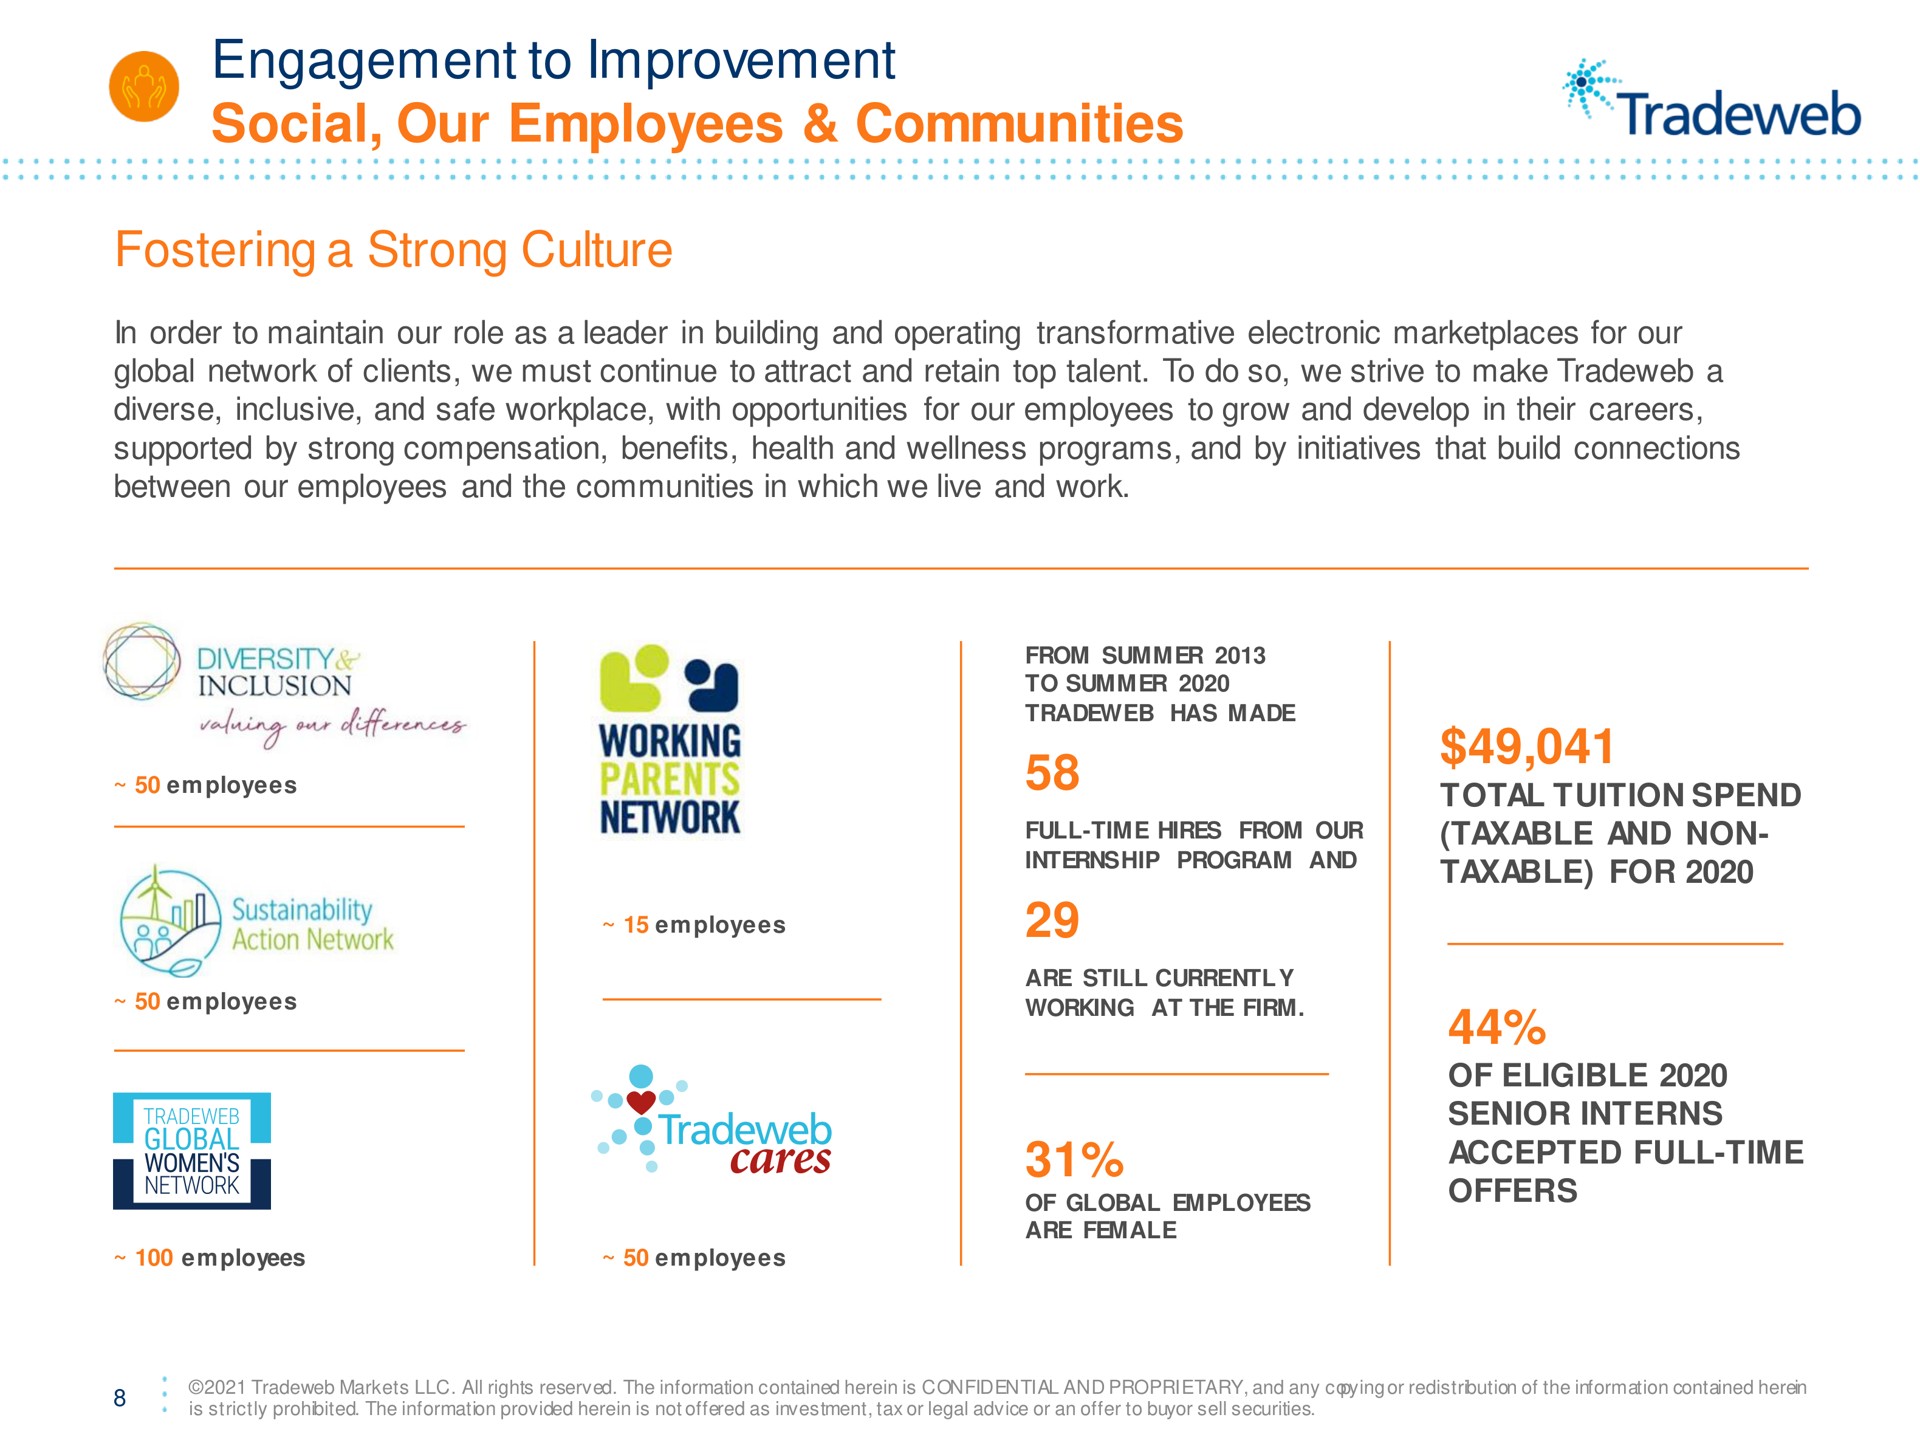 engagement to improvement social our employees communities fostering a strong culture total tuition spend taxable and non taxable for | Tradeweb